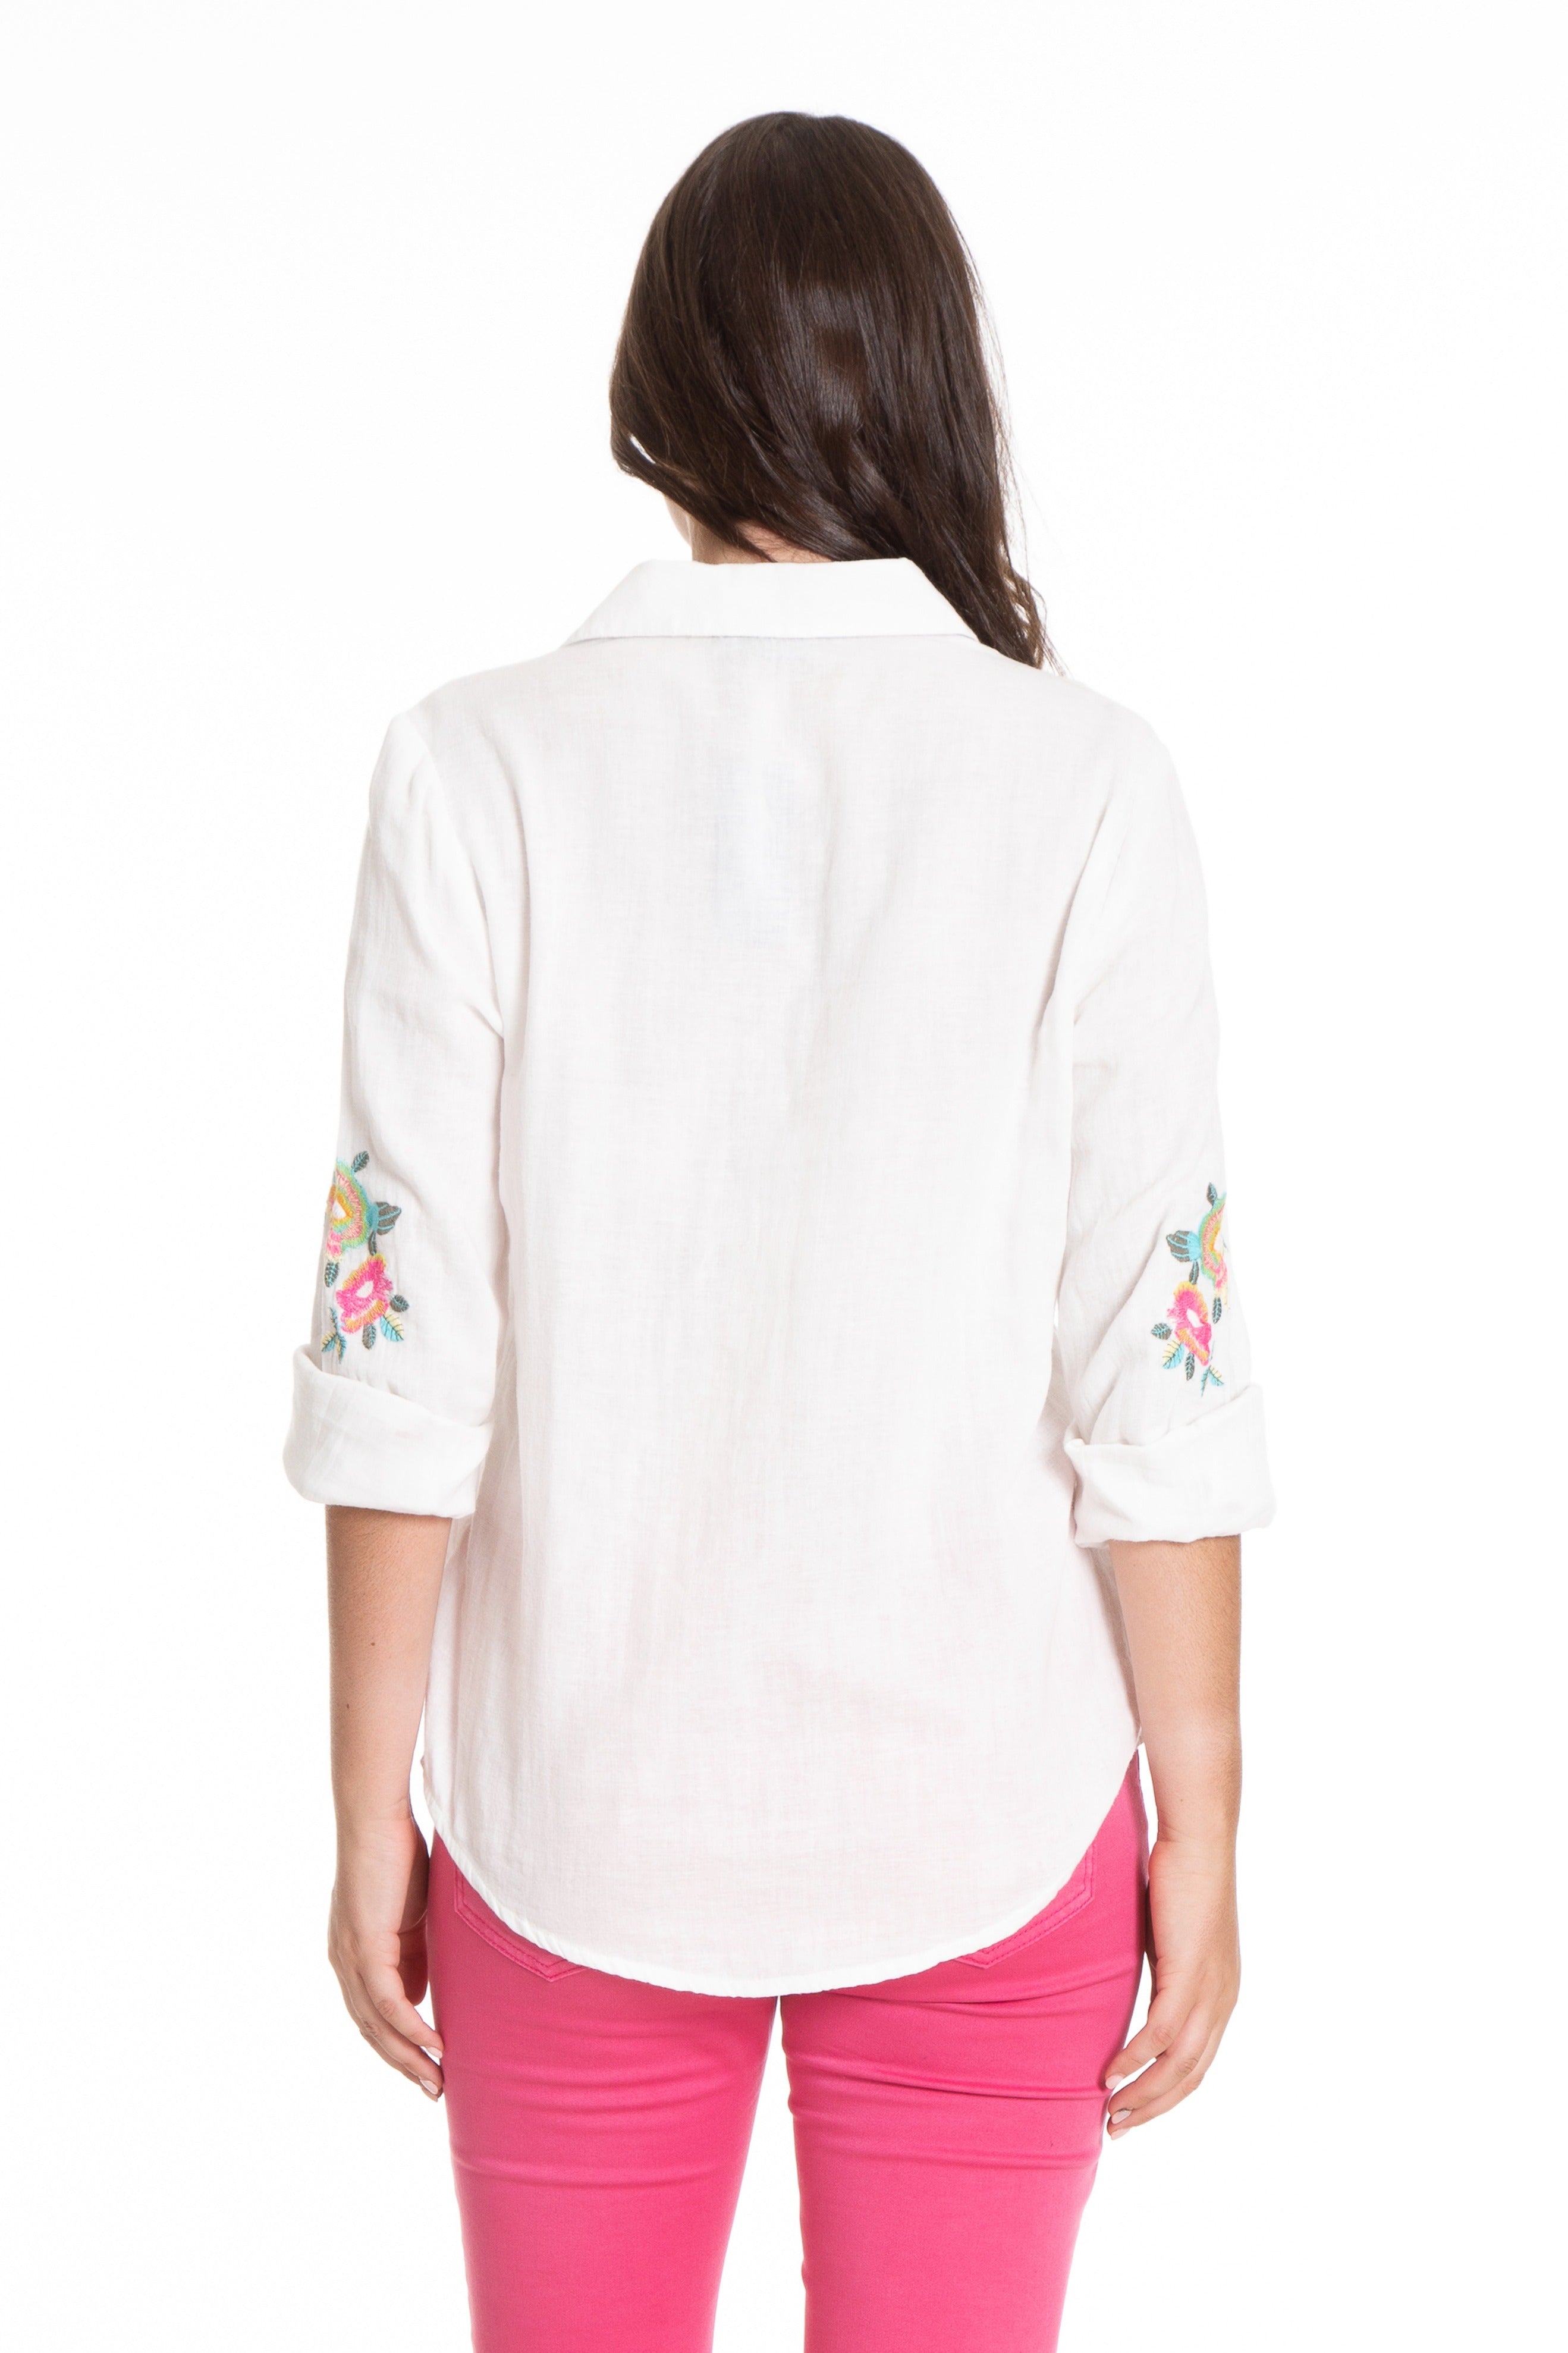 Floral Embroidered Button Down Shirt Back APNY